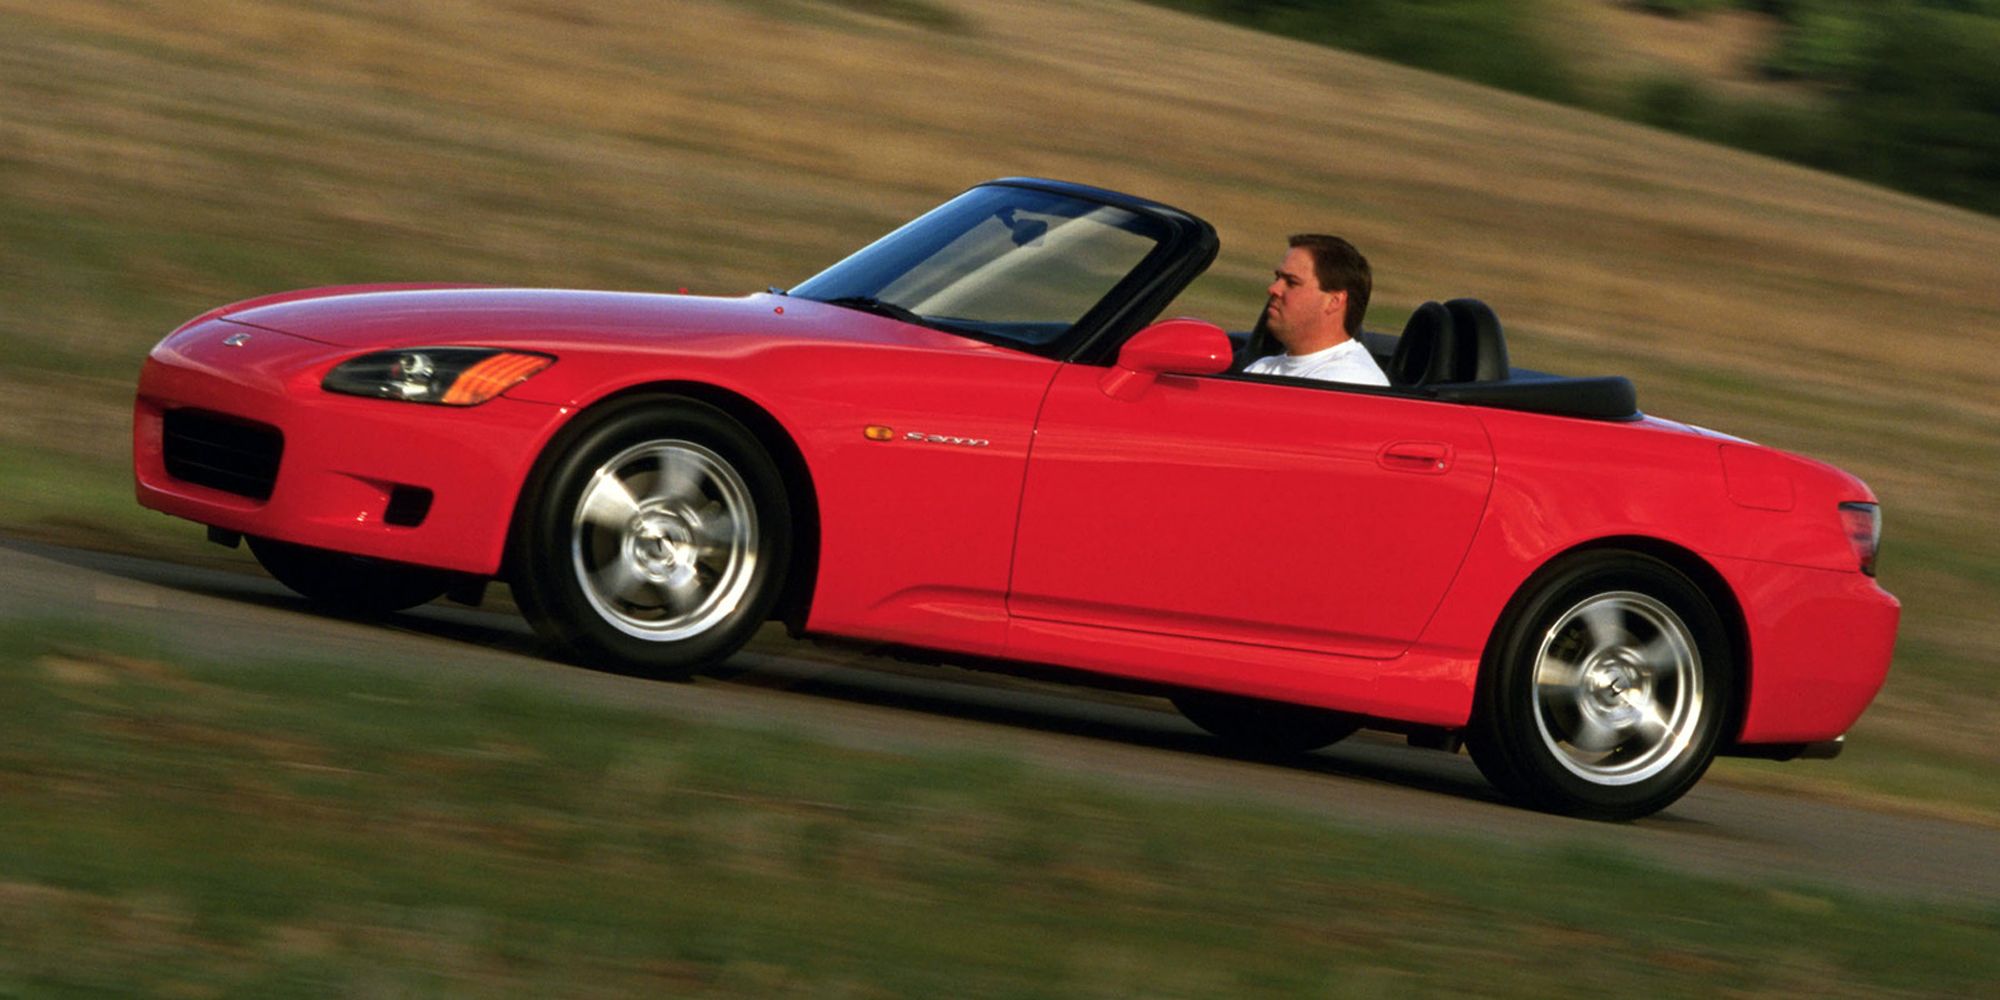 A red S2000 on the move